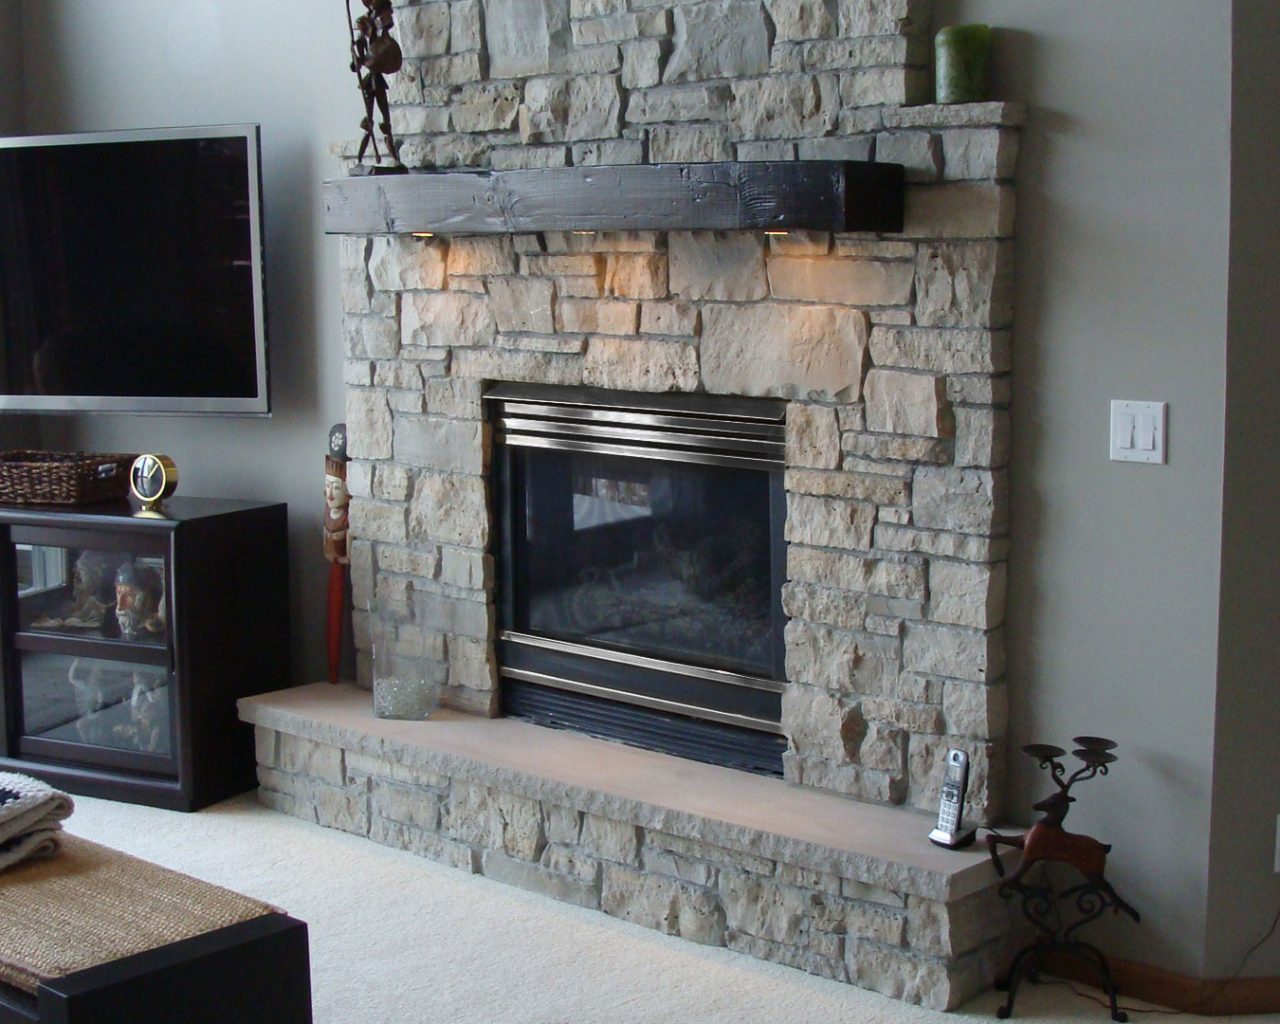 Minneapolis - Indoor Fireplace Renovation with Wood Mantle